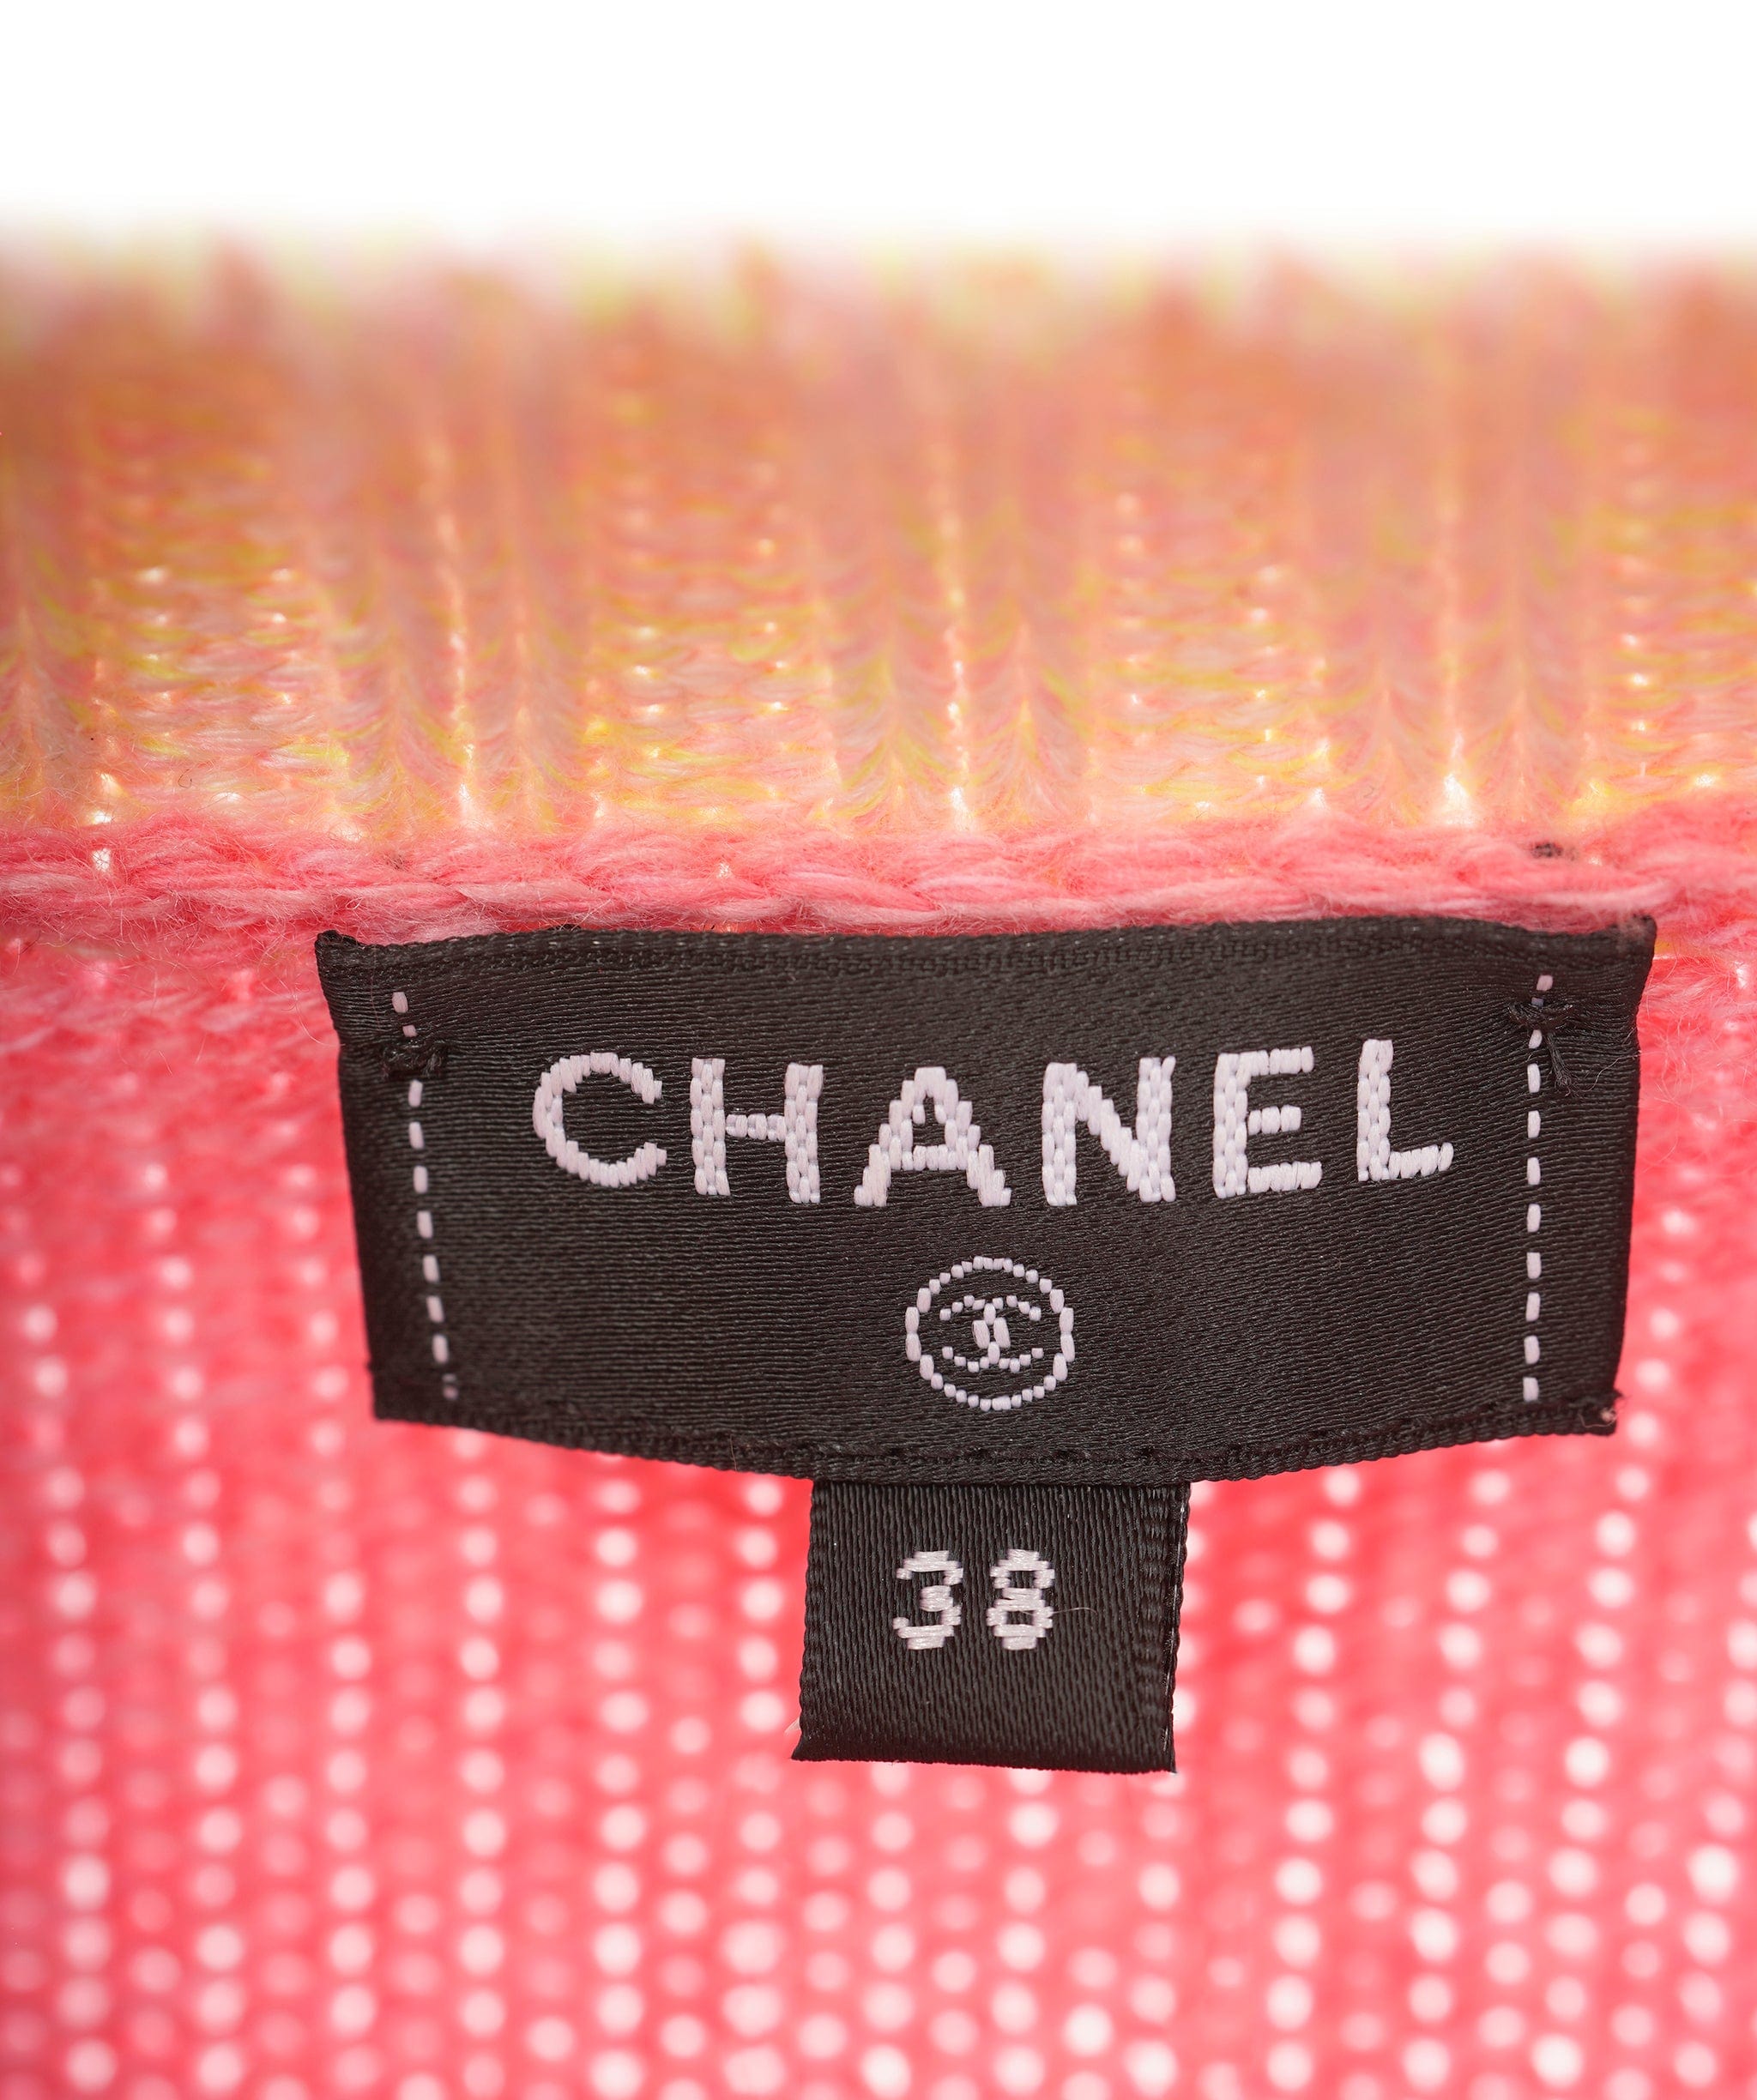 Chanel Chanel Pink cashmere center CC sweater with buttons  AVC1941